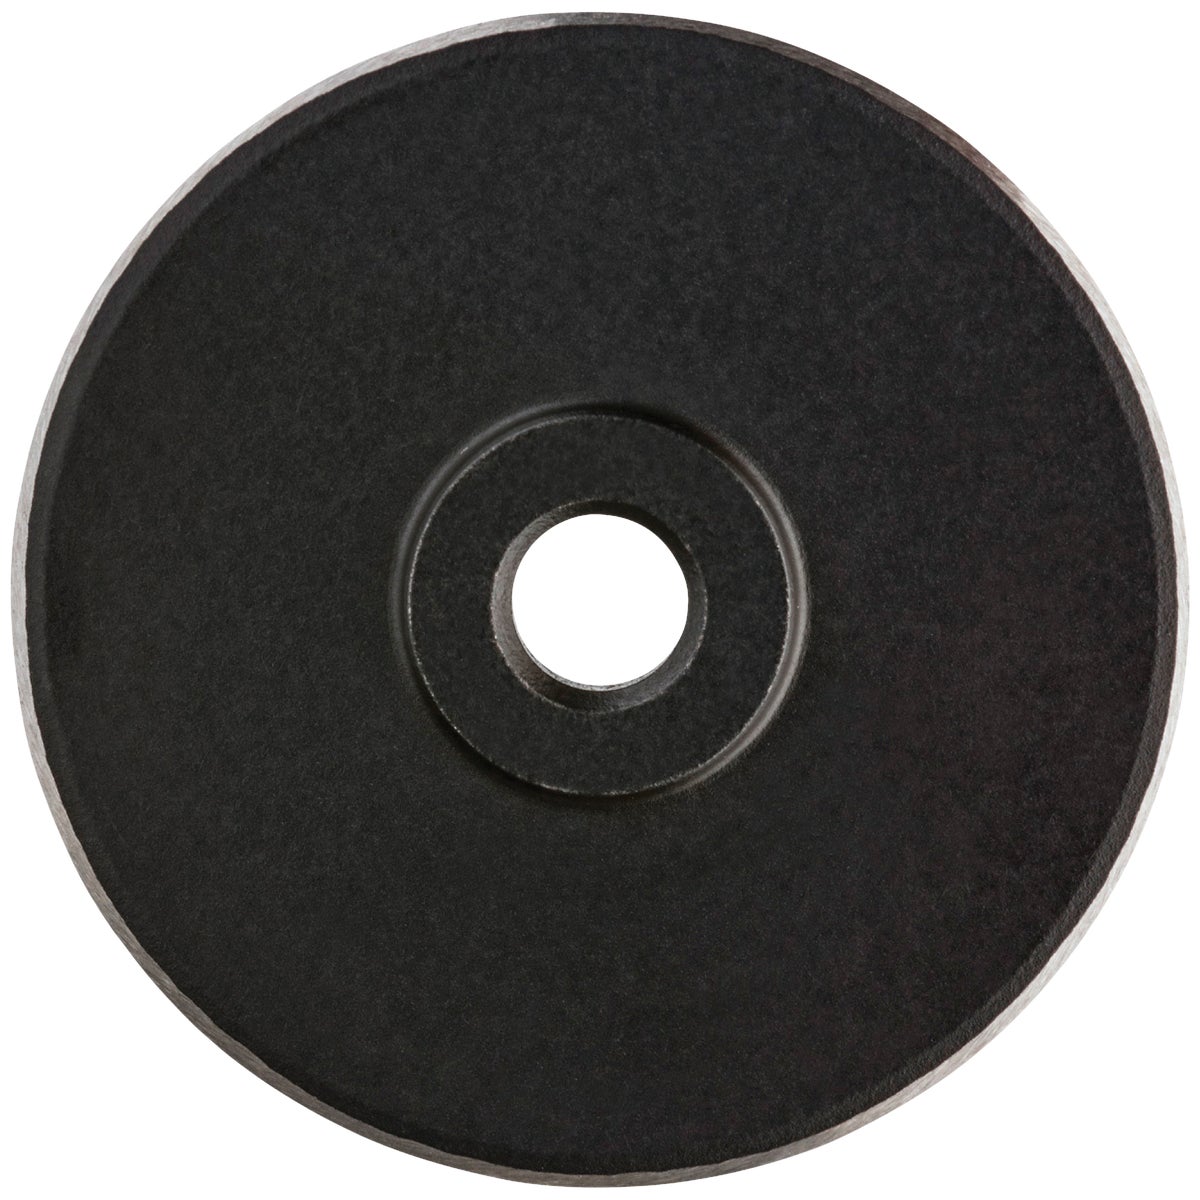 Milwaukee Replacement Cutter Wheel for Quick Adjust Tubing Cutter